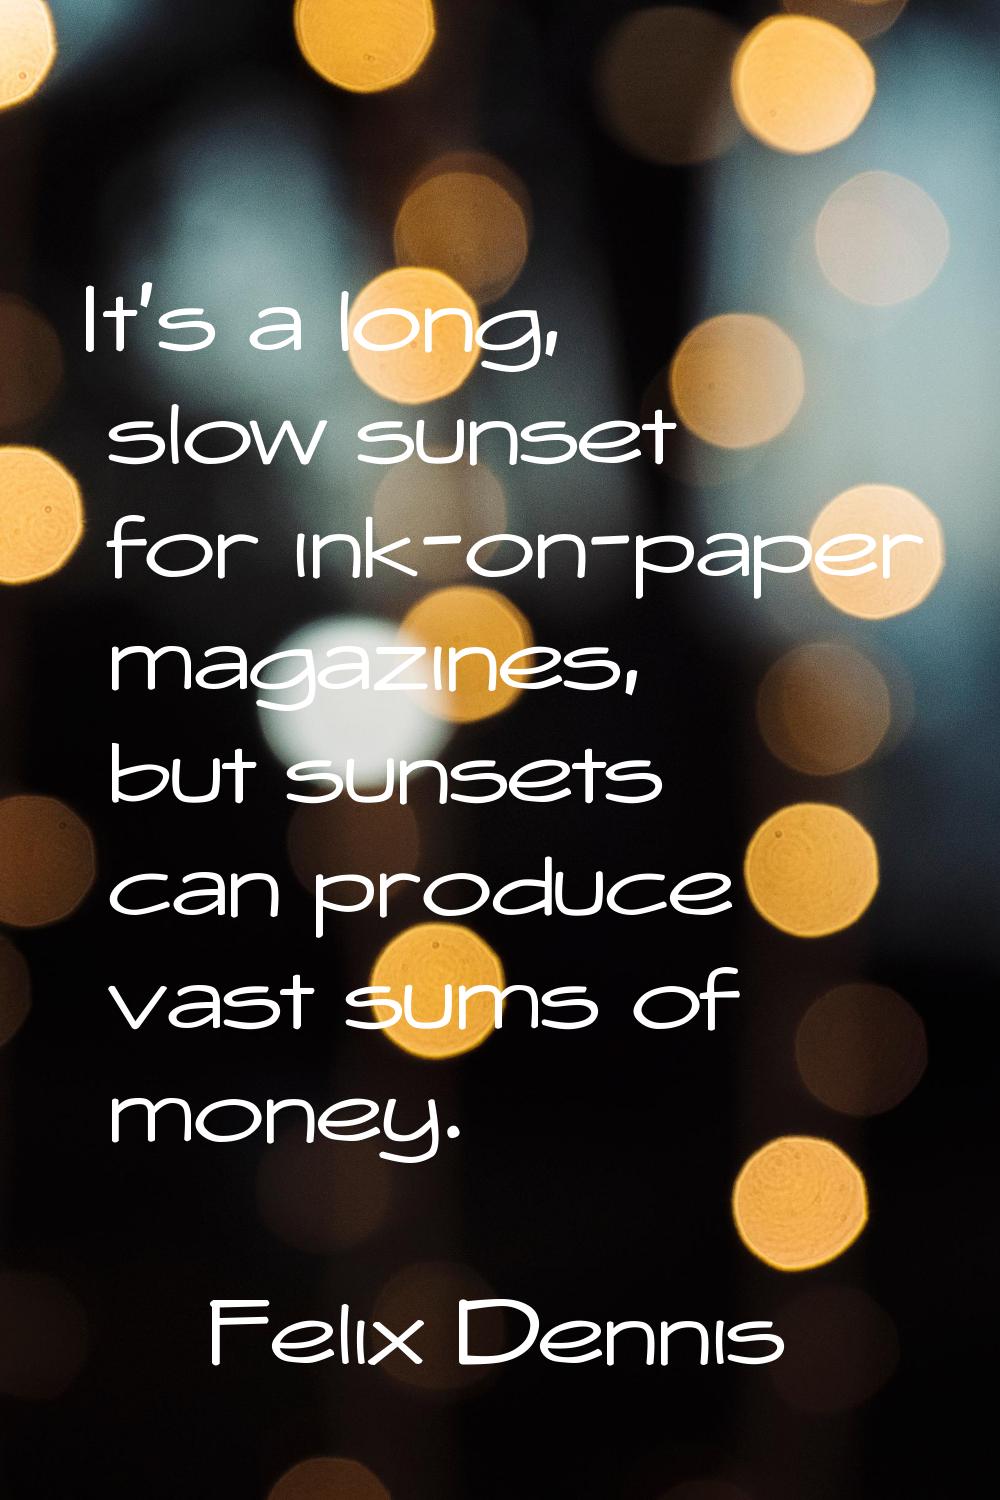 It's a long, slow sunset for ink-on-paper magazines, but sunsets can produce vast sums of money.